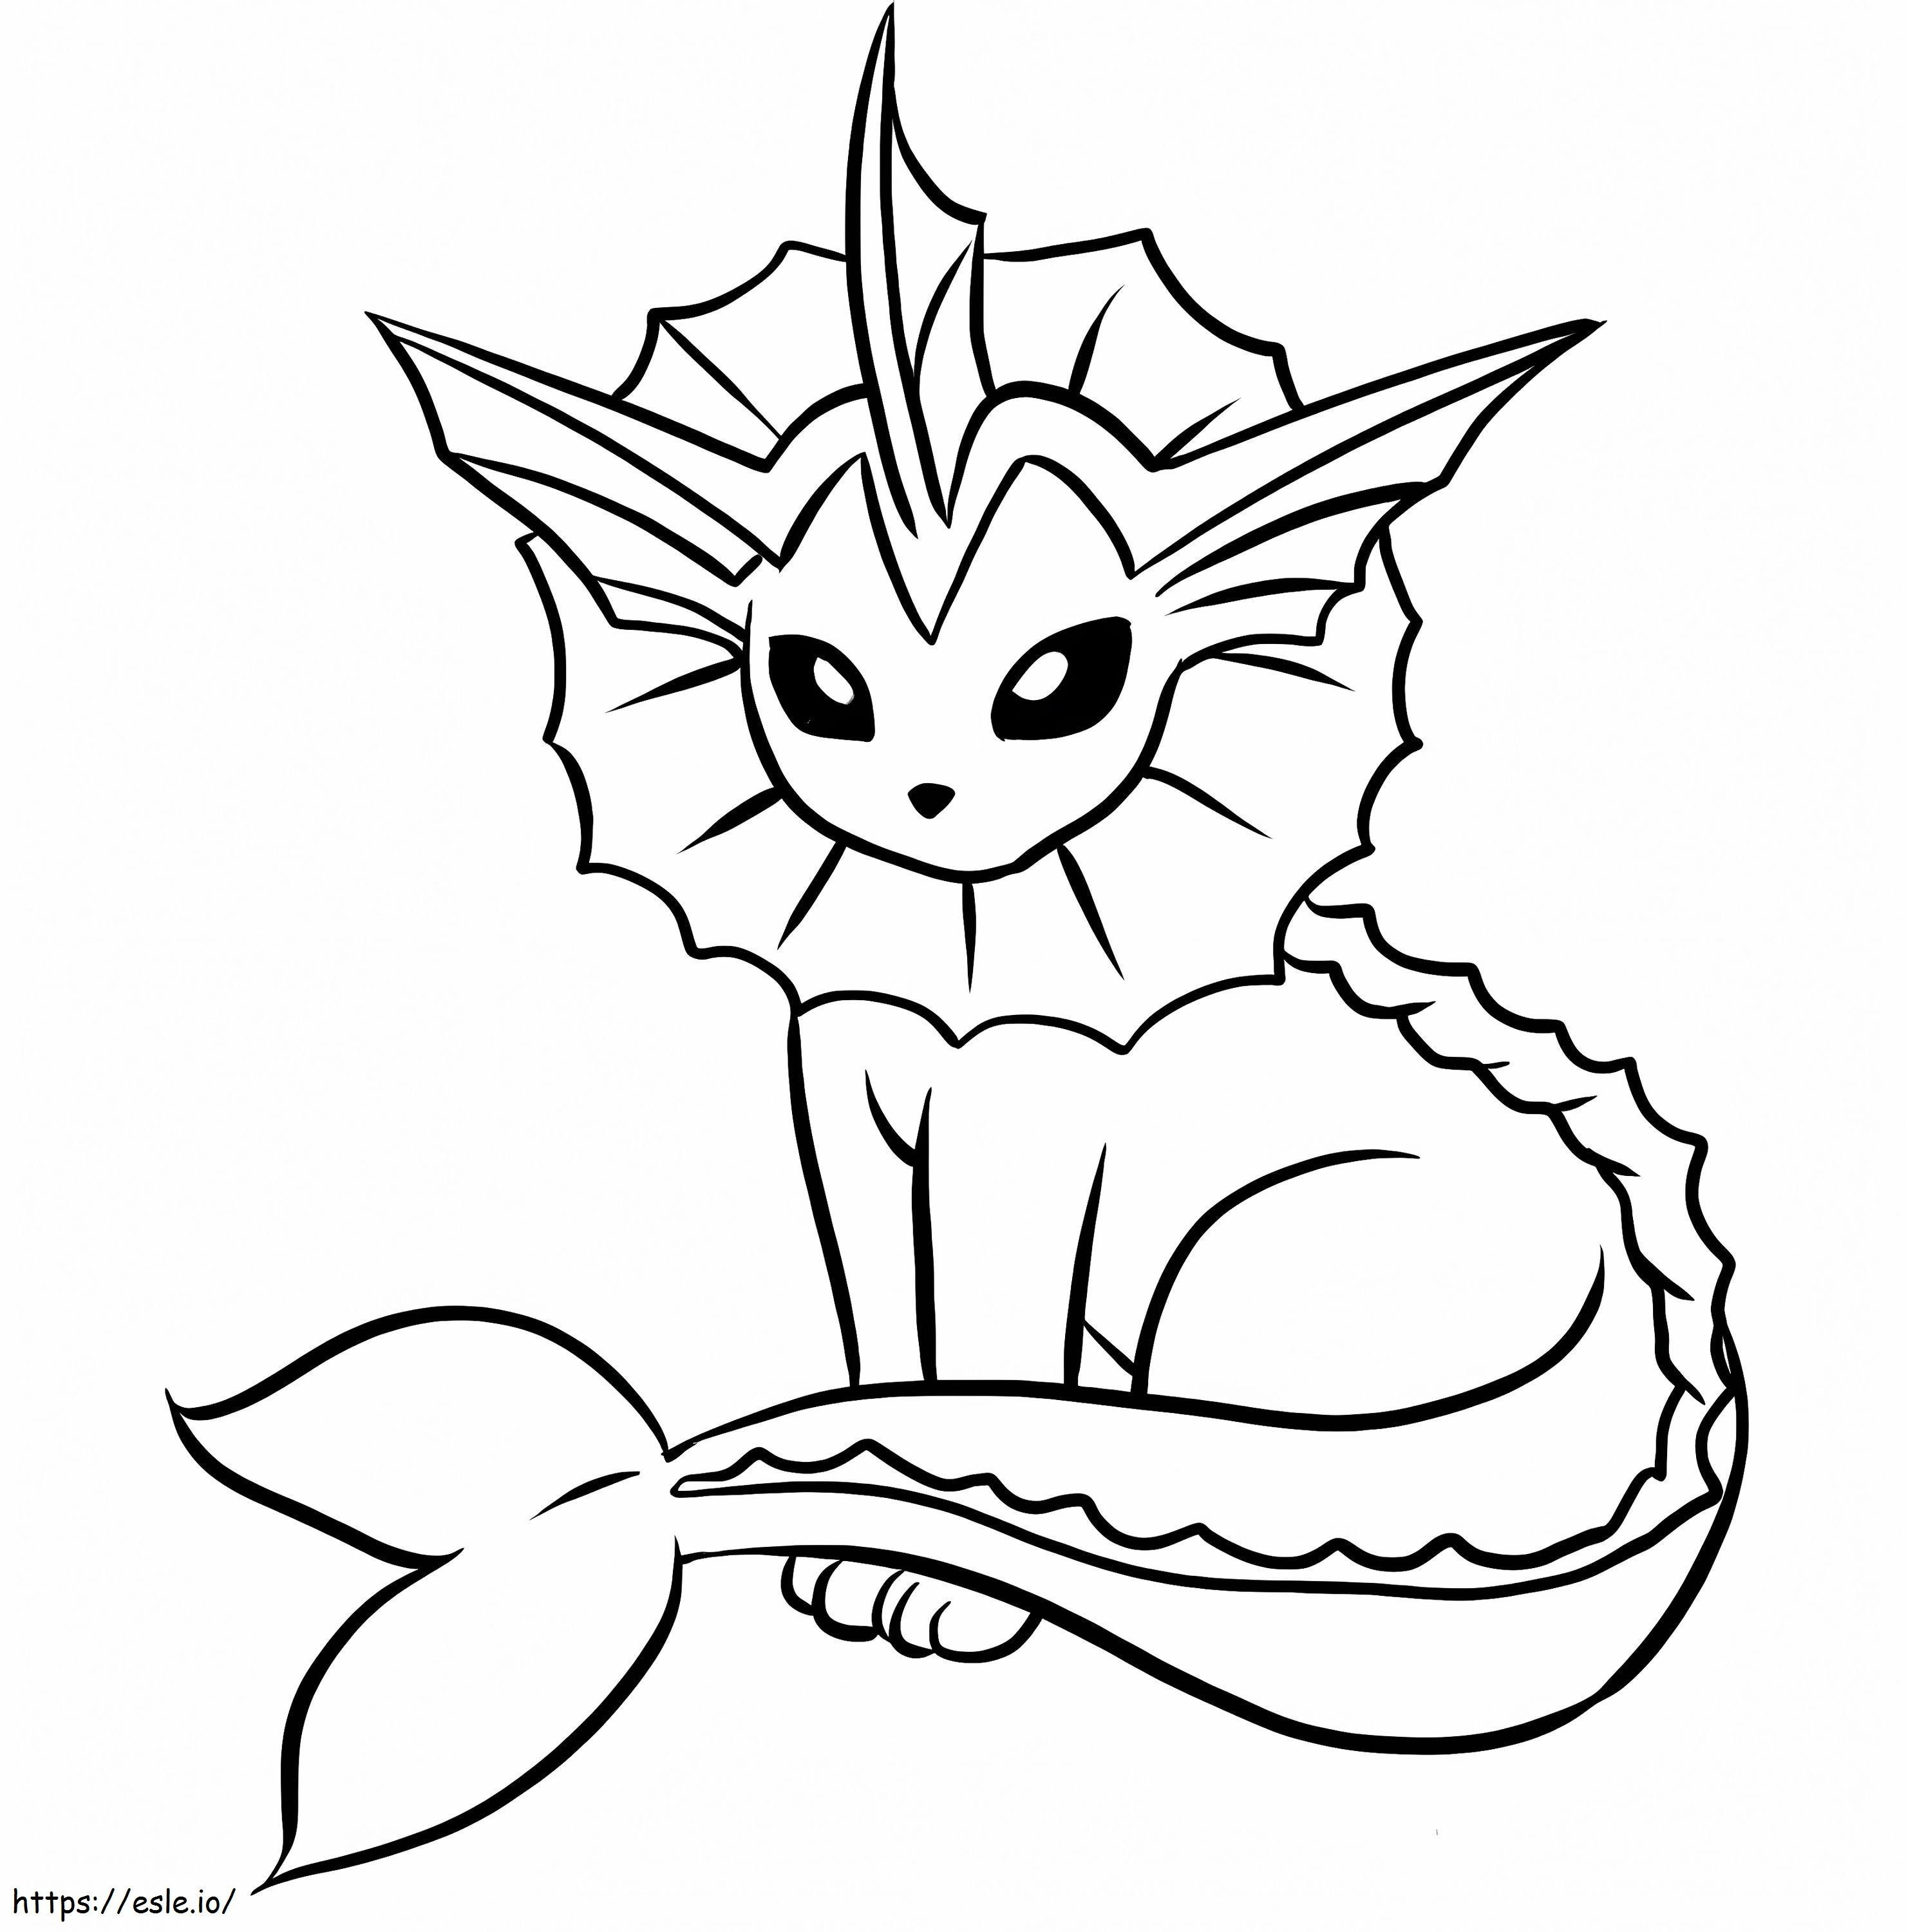 1529292820 91 coloring page